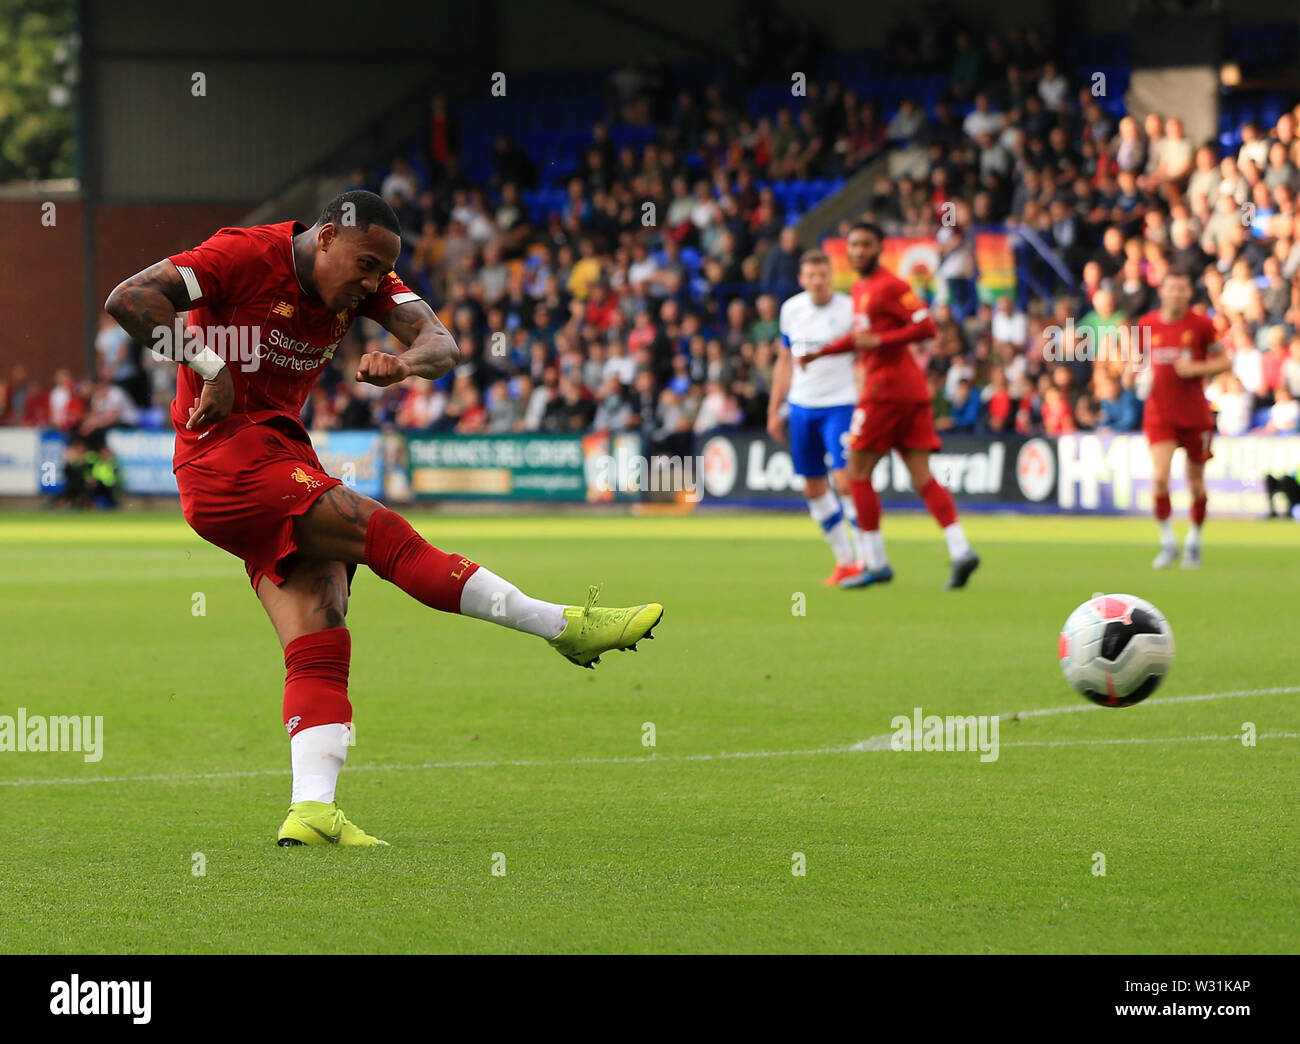 11th July 2019; Prenton Park, Tranmere, England; Pre-season friendly football, Tranmere versus Liverpool; Nathaniel Clyne of Liverpool shoots and scores the opening goal after 8 minutes for 0-1 Stock Photo